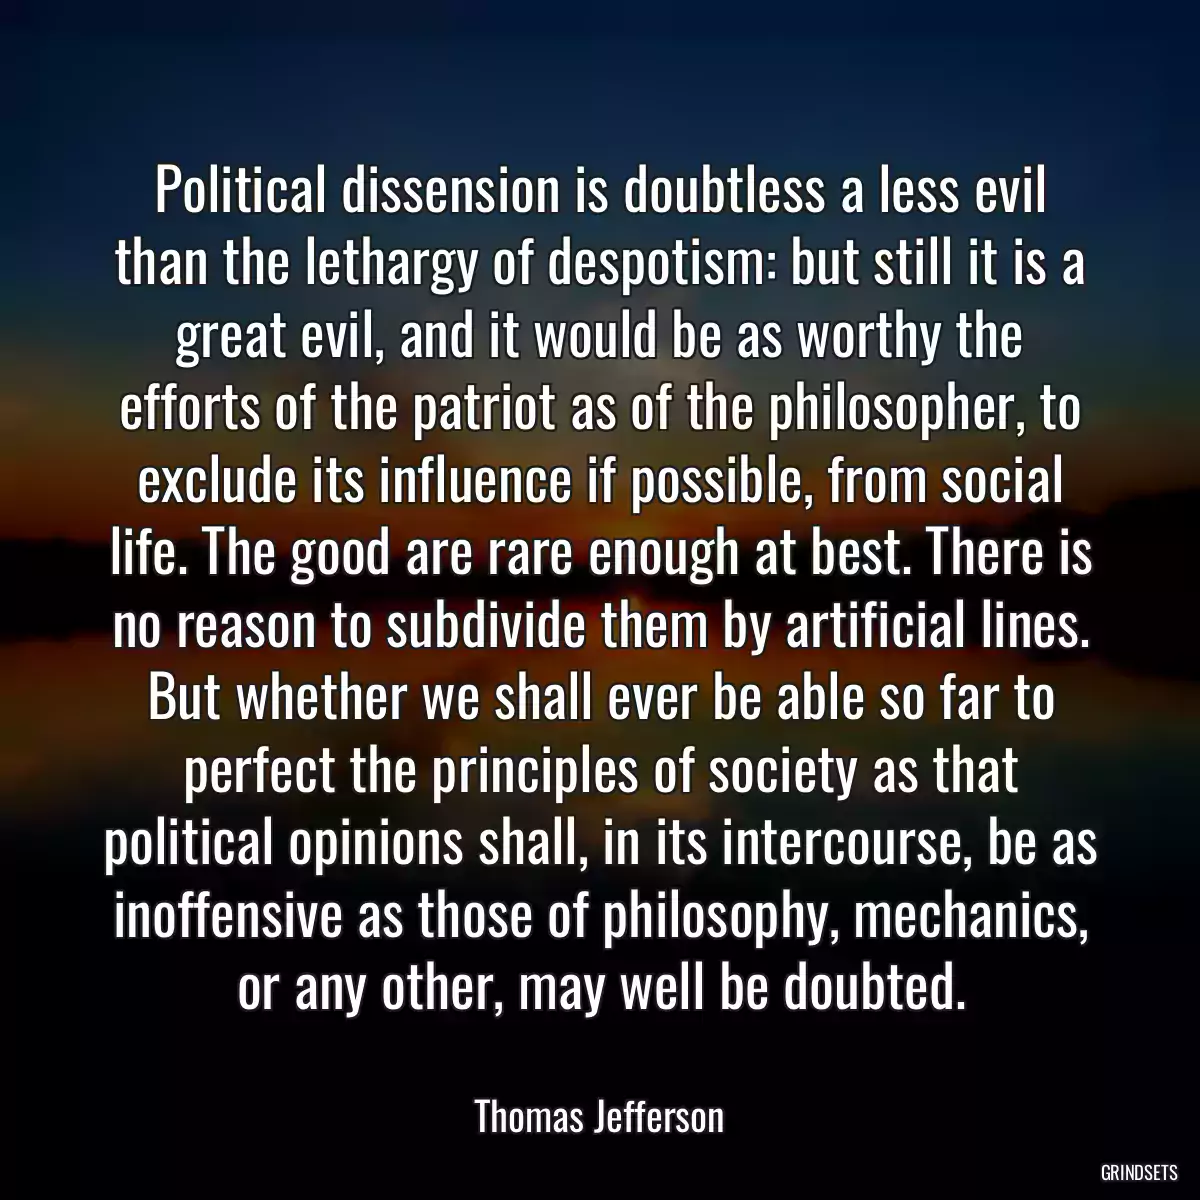 Political dissension is doubtless a less evil than the lethargy of despotism: but still it is a great evil, and it would be as worthy the efforts of the patriot as of the philosopher, to exclude its influence if possible, from social life. The good are rare enough at best. There is no reason to subdivide them by artificial lines. But whether we shall ever be able so far to perfect the principles of society as that political opinions shall, in its intercourse, be as inoffensive as those of philosophy, mechanics, or any other, may well be doubted.